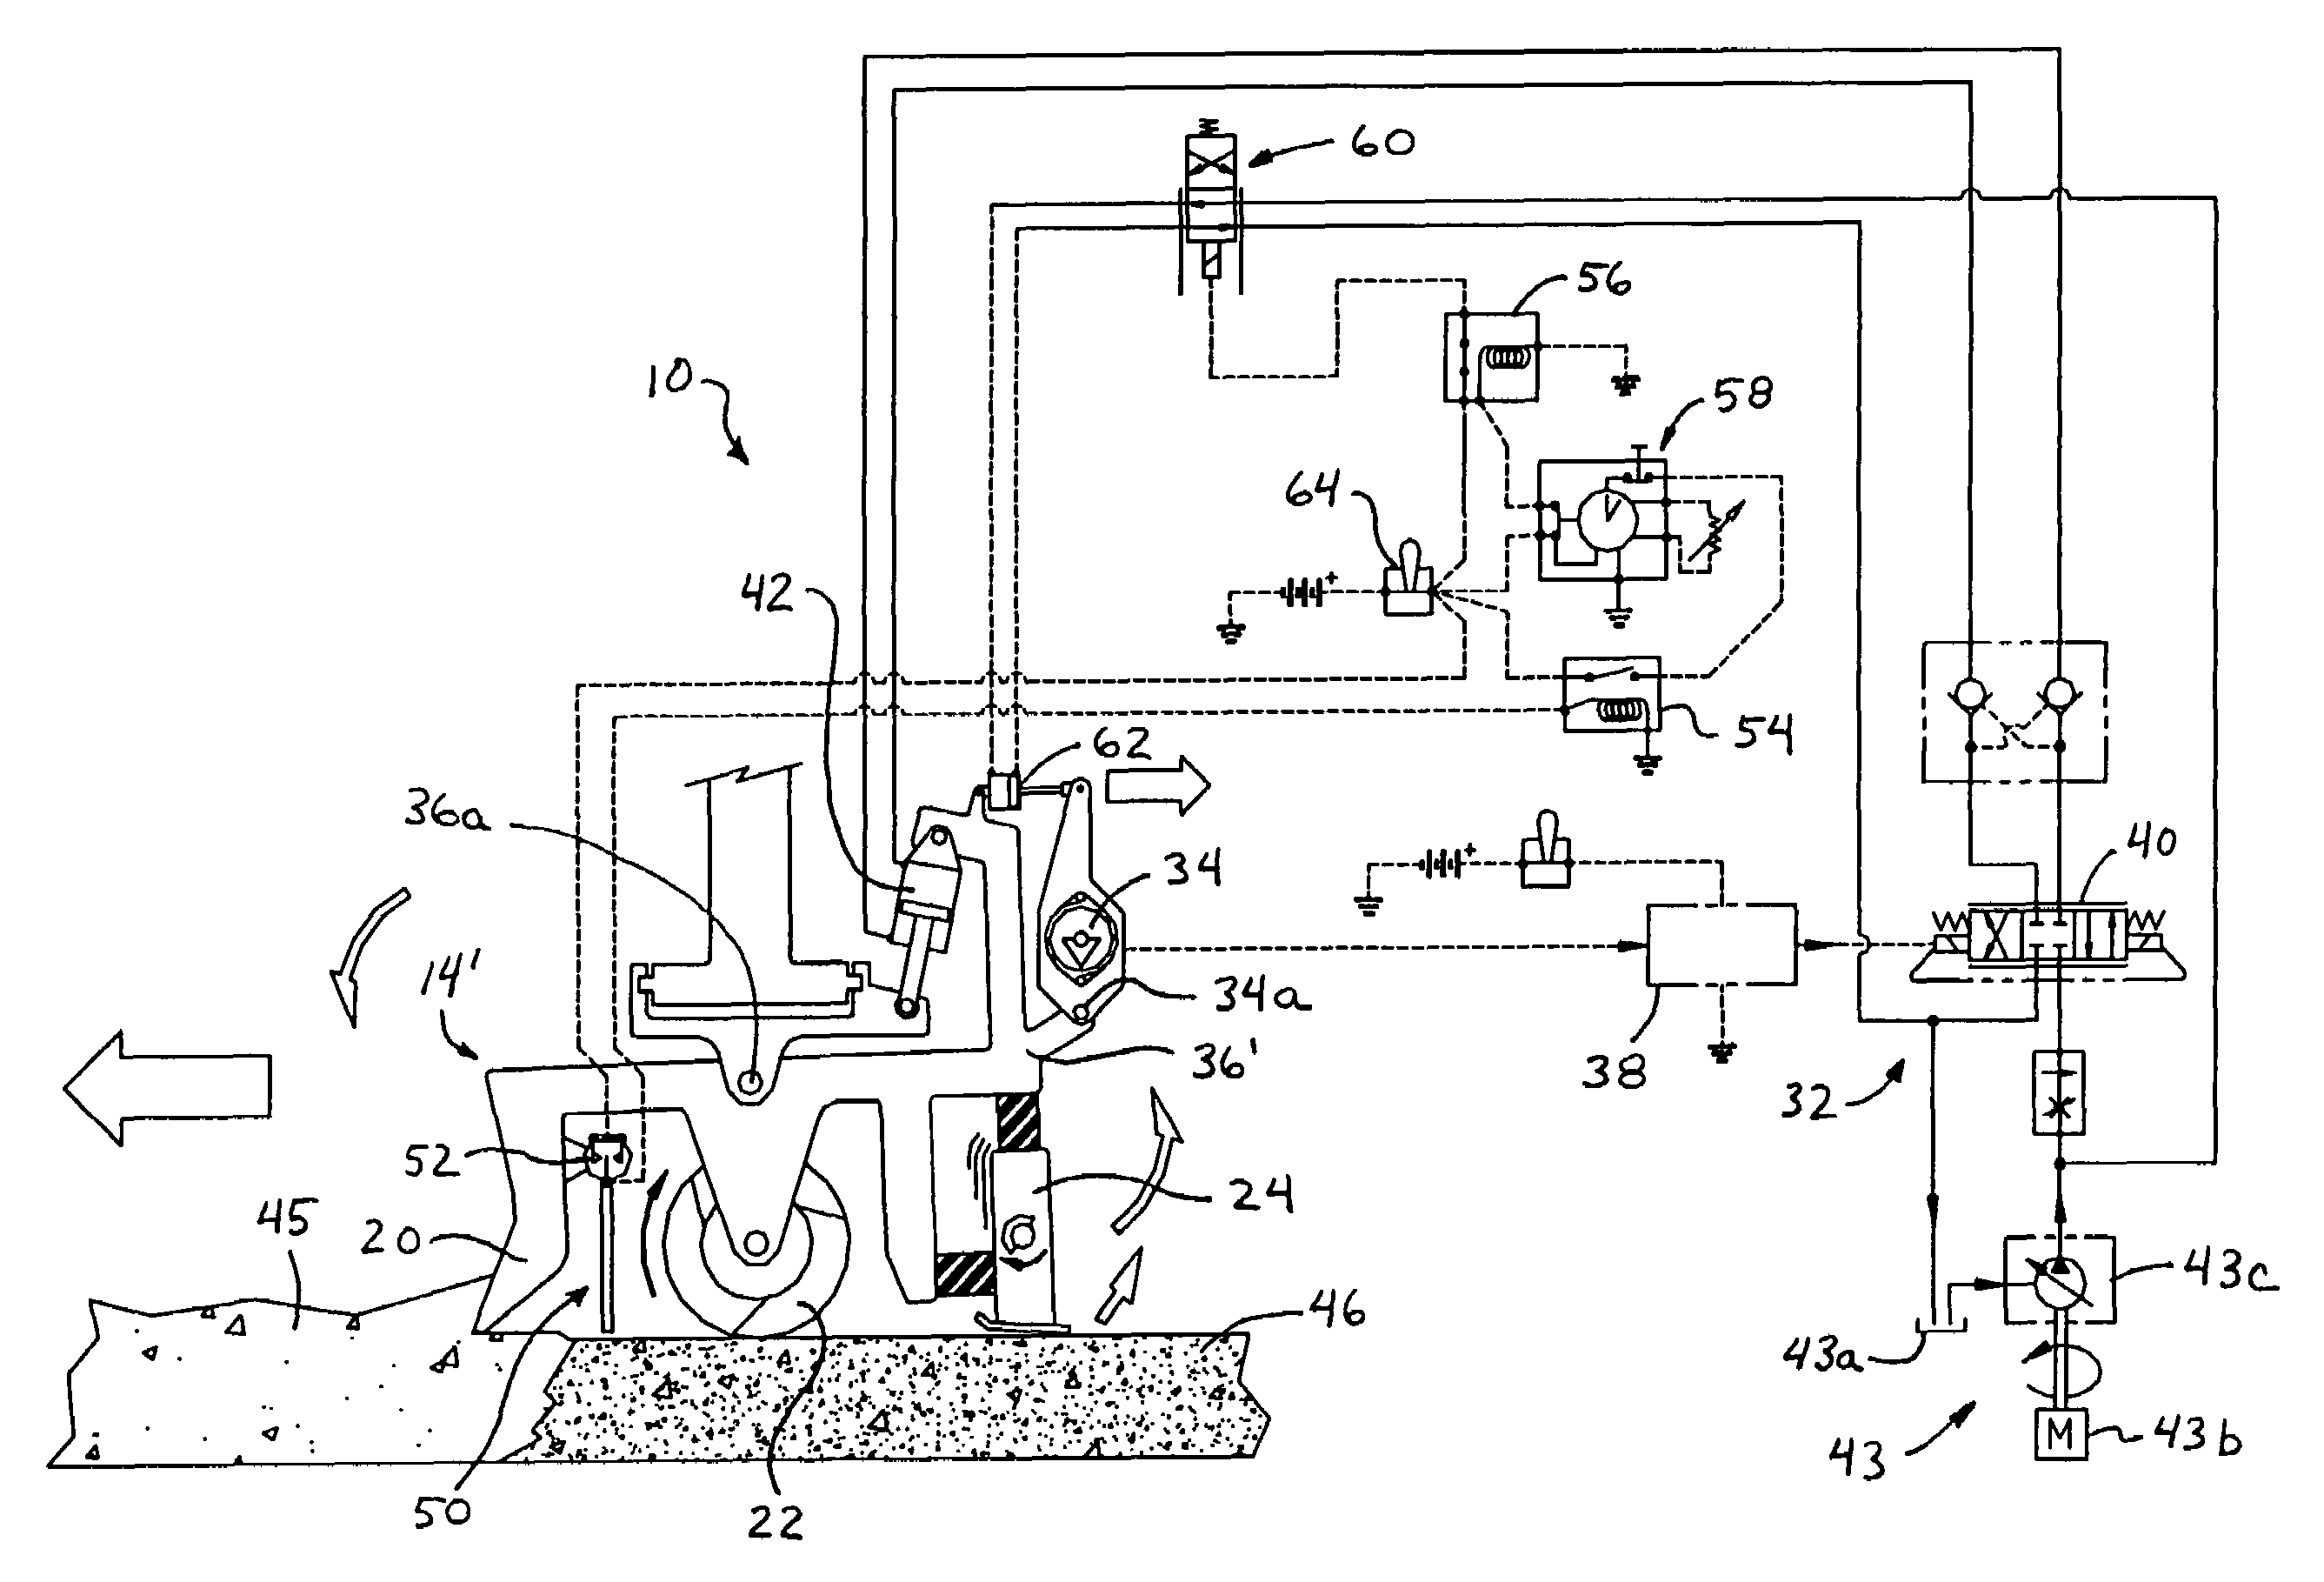 Apparatus and method for improving the control of a concrete screed head assembly